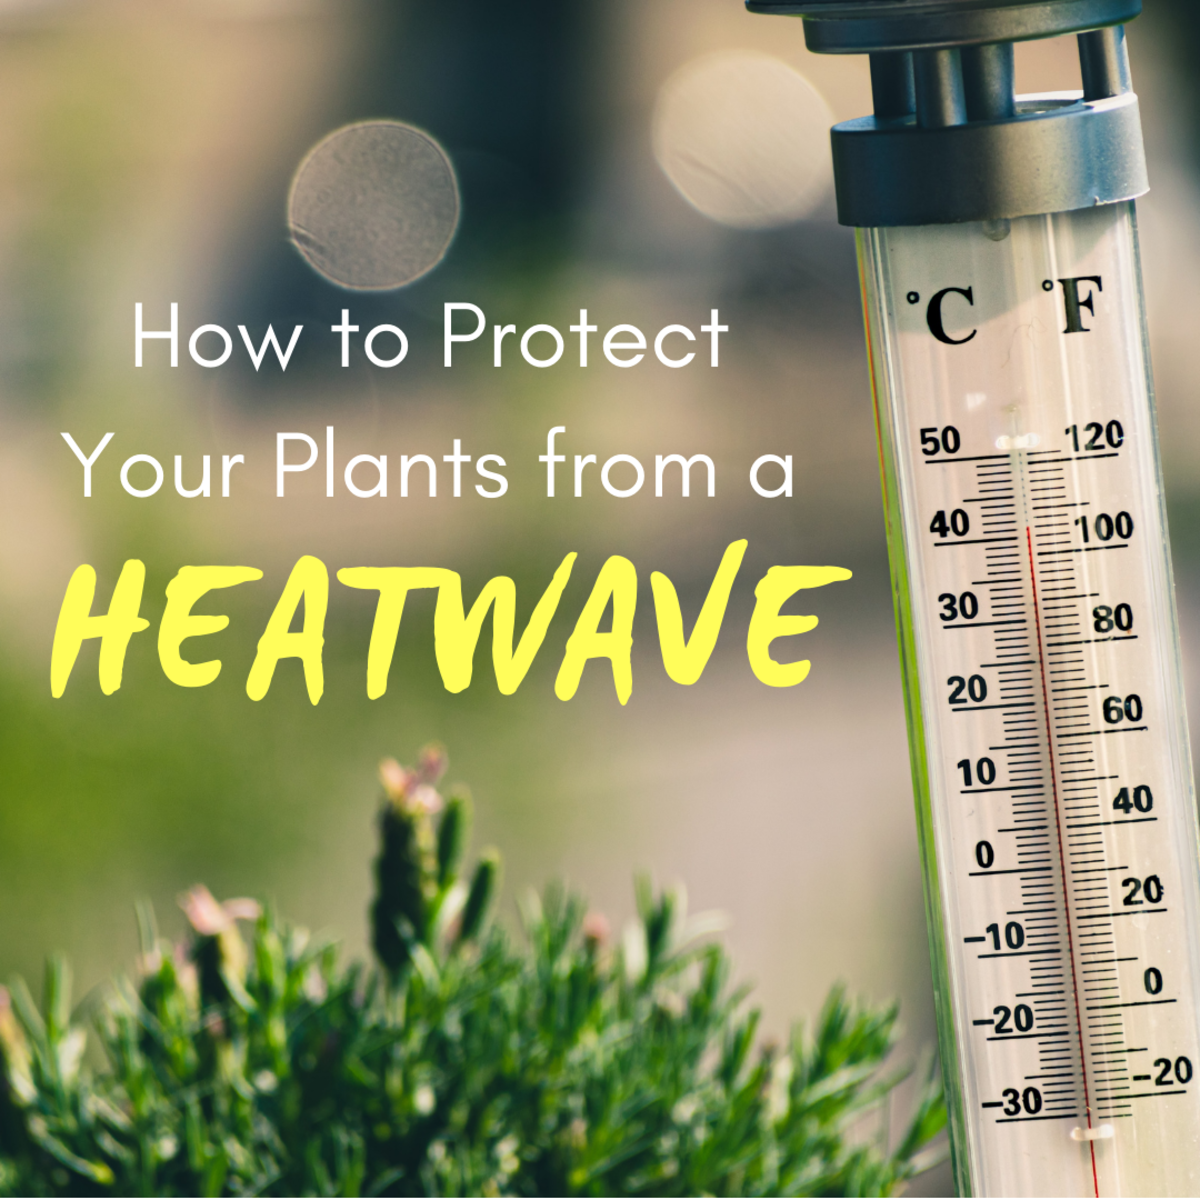 Extreme heat won't trouble your garden as long as you take the right steps to protect your plants.  